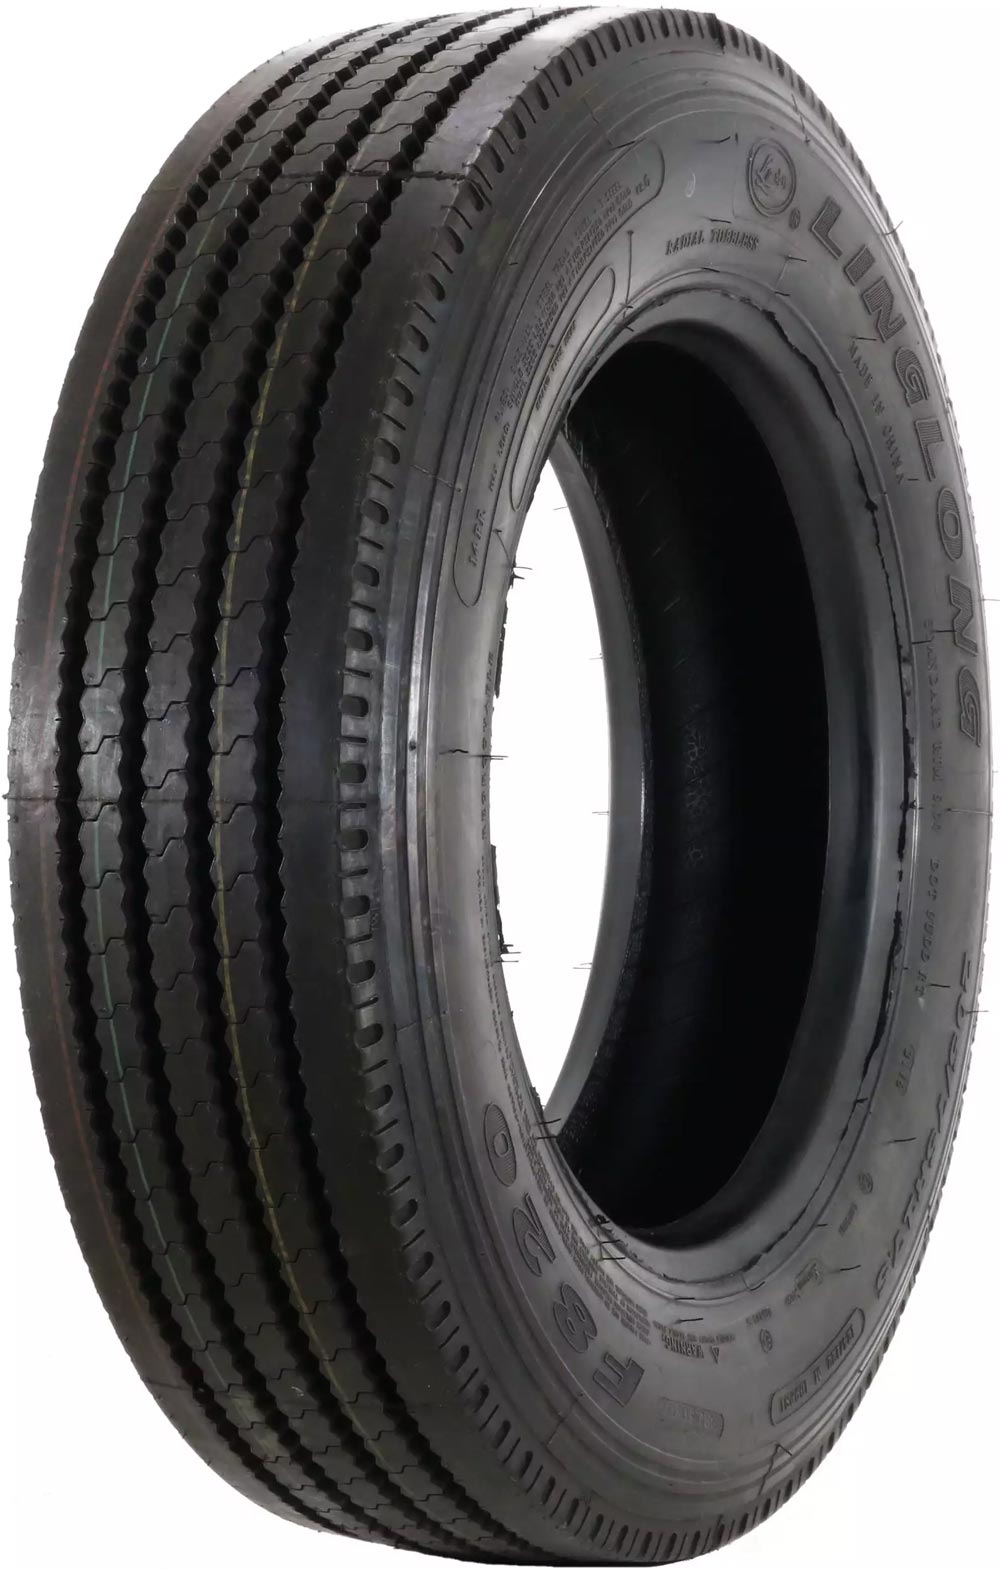 product_type-heavy_tires LINGLONG F820 18PR 265/70 R19.5 143J